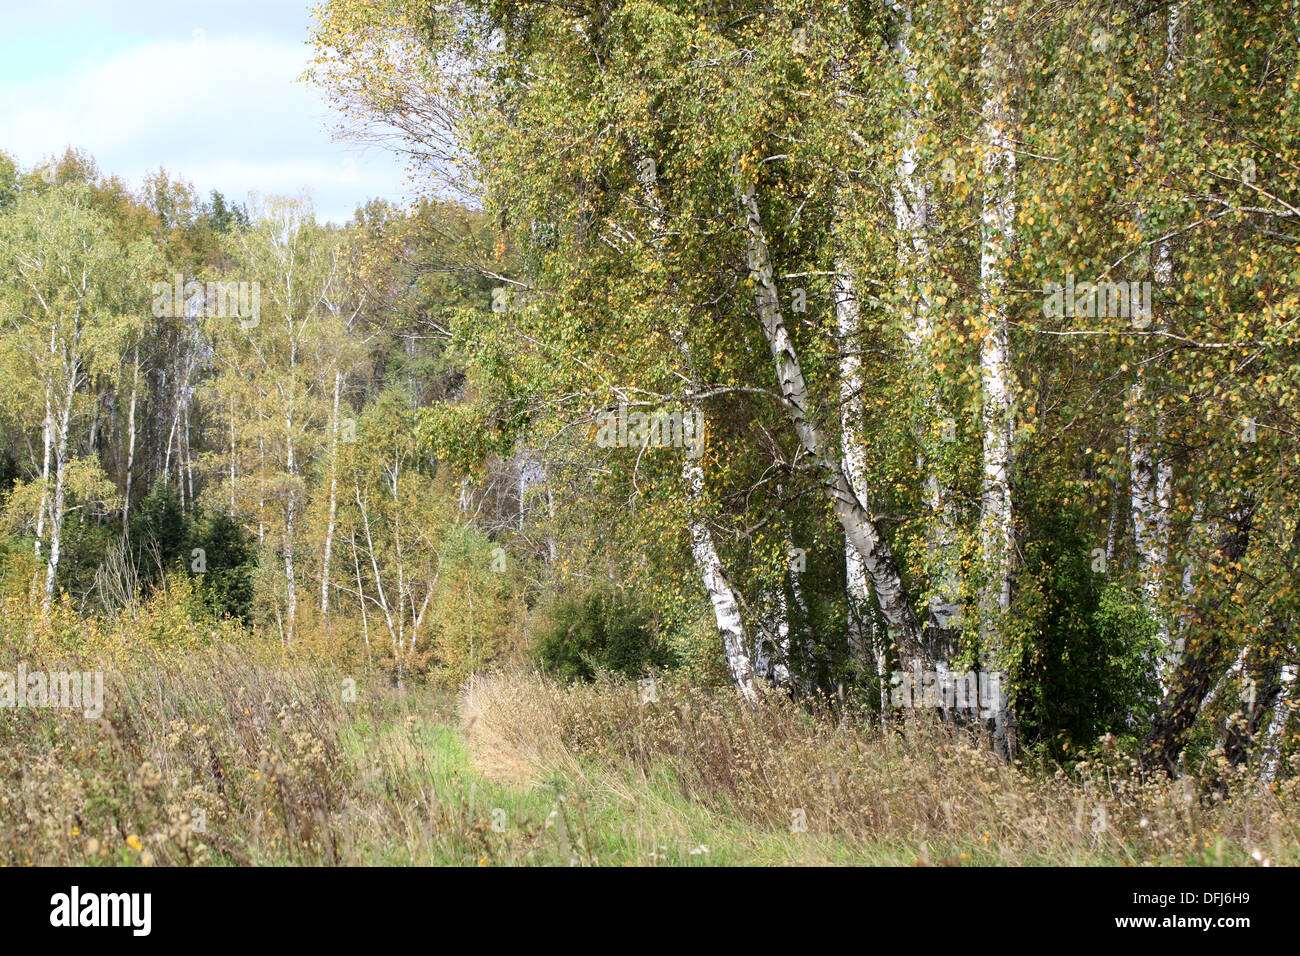 Green birch tree in the forest Stock Photo